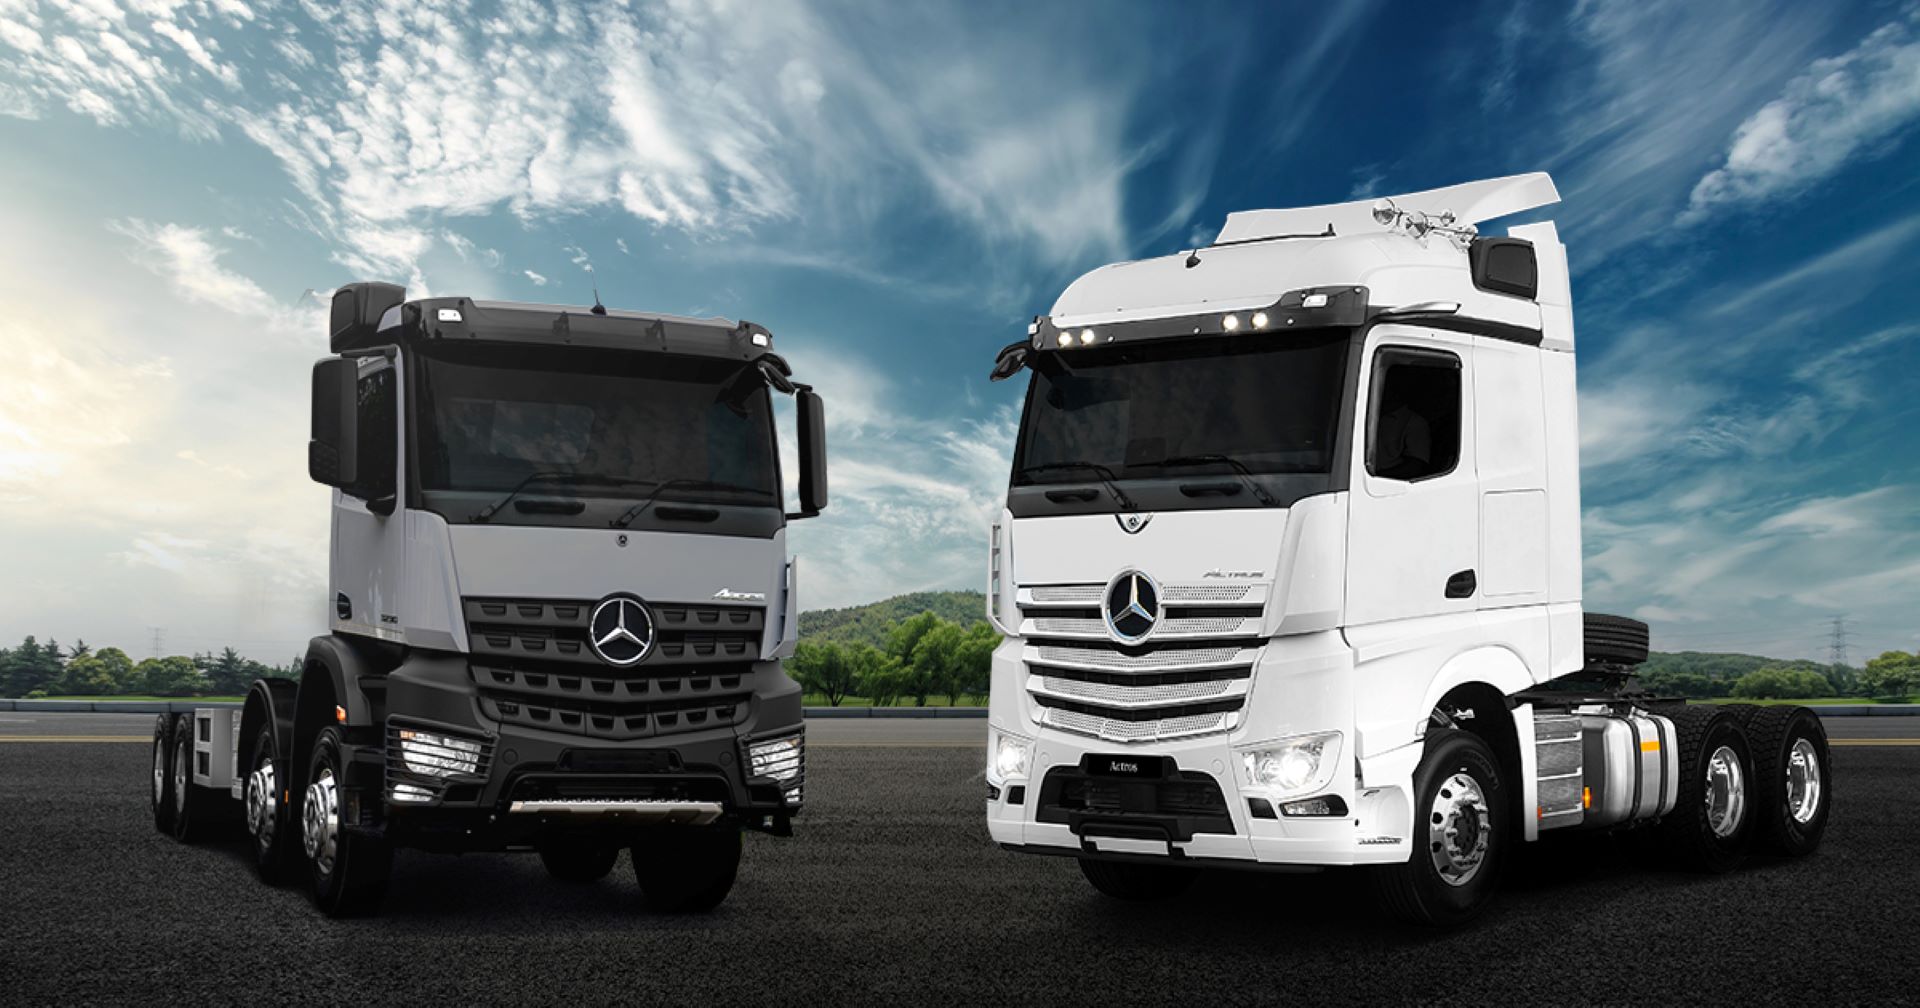 Mercedes-Benz Trucks retains market leadership in strong heavy commercial vehicle market, expressing deep gratitude to its customers